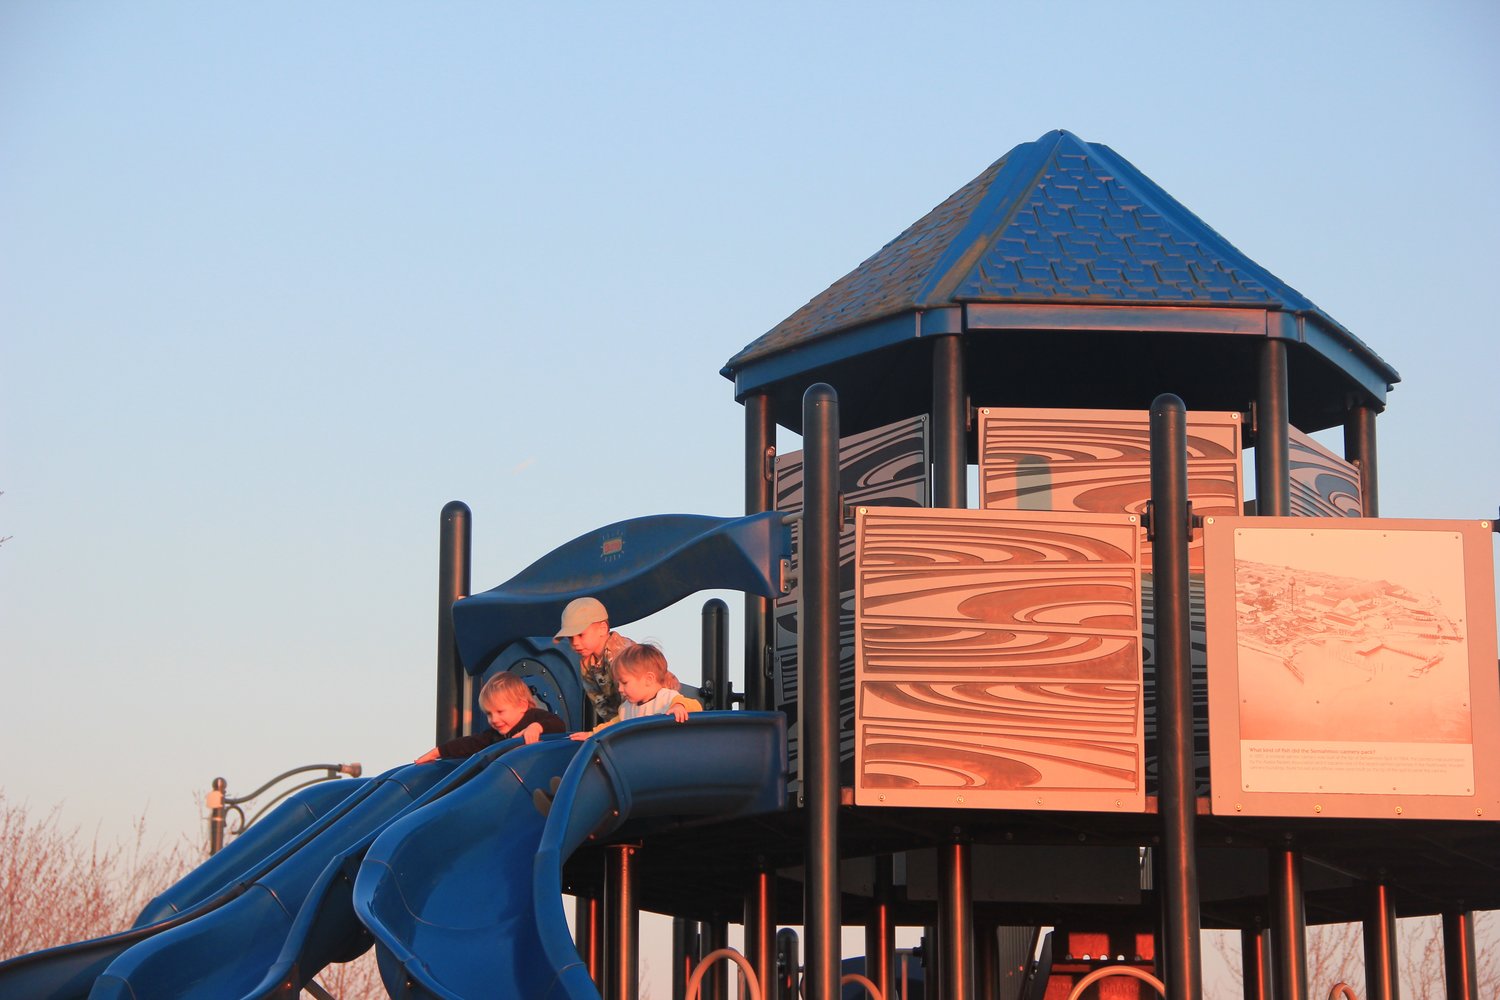 The Blaine Marine Park pirate playground offers a place for children to run around as the days become longer and weather becomes warmer, as seen during the evening of March 28. The playground is fully reopened after being closed earlier this winter while shoreline construction was being done.